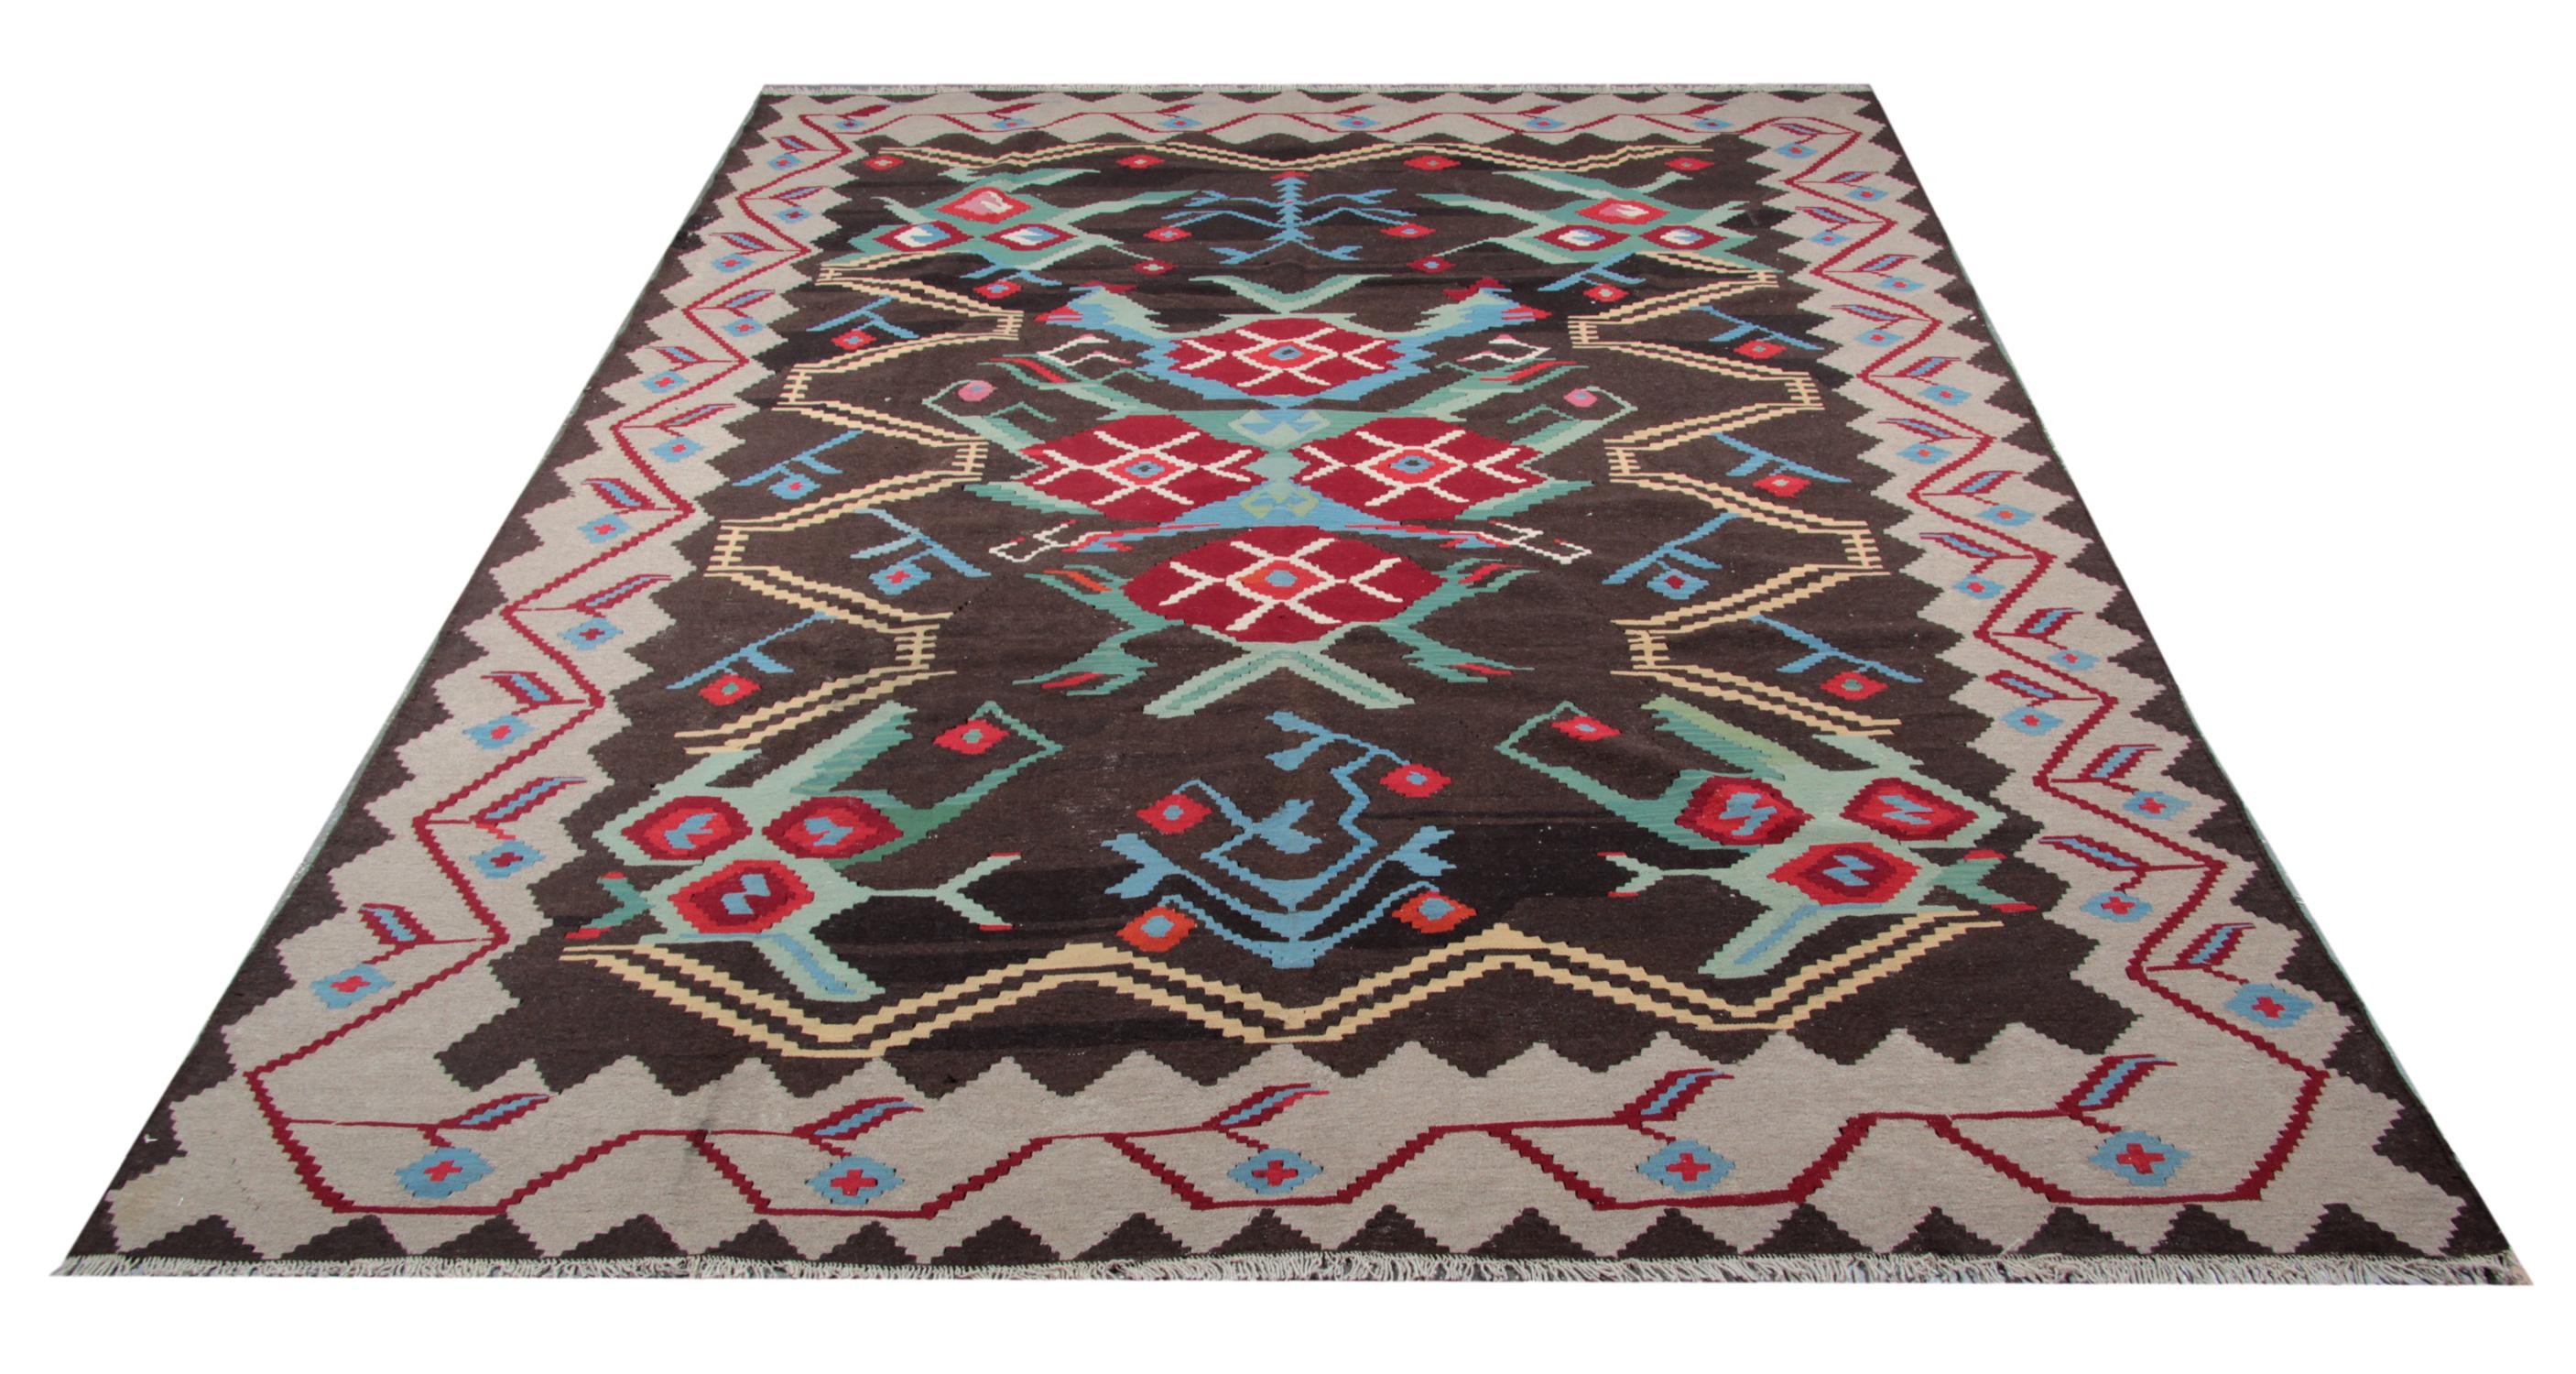 Vegetable Dyed Antique Kilim Rugs, Handwoven Traditional Rugs, Carpet from Karabagh